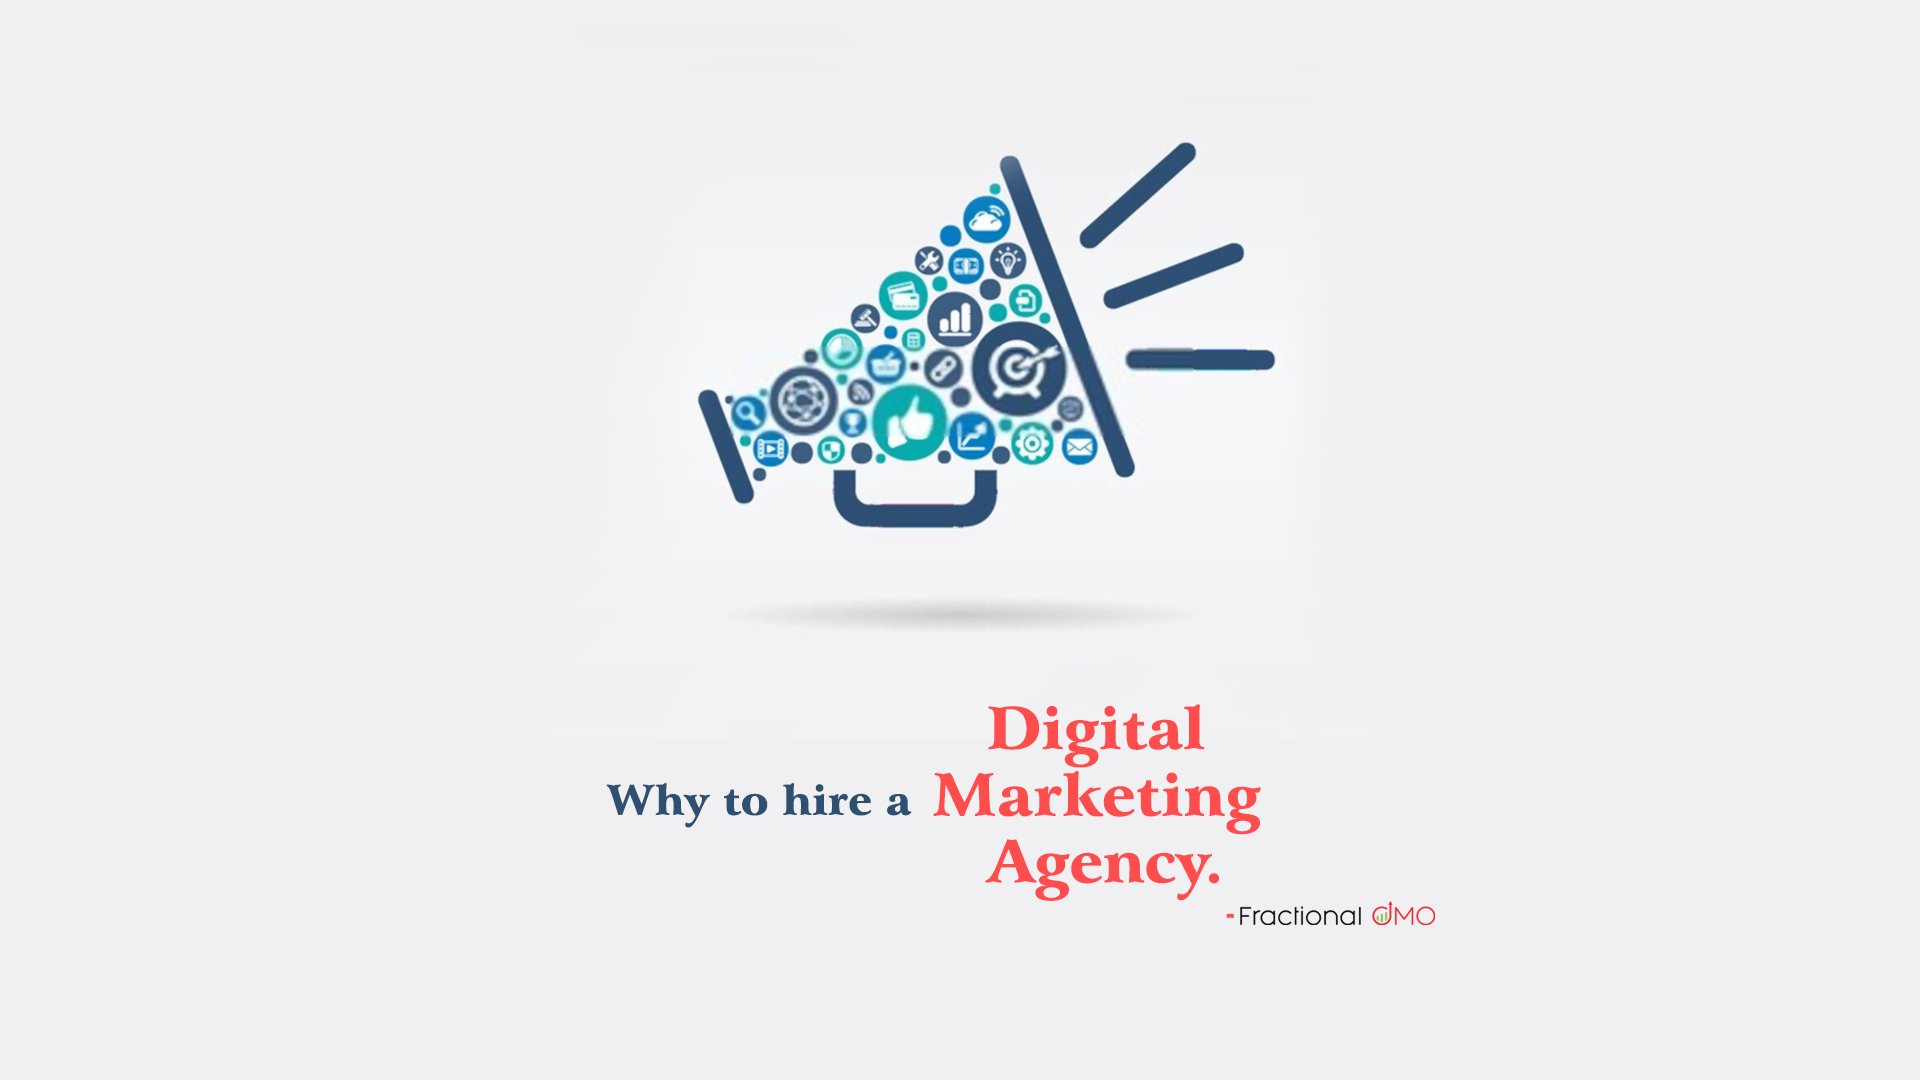 Why to hire a Digital Marketing Agency